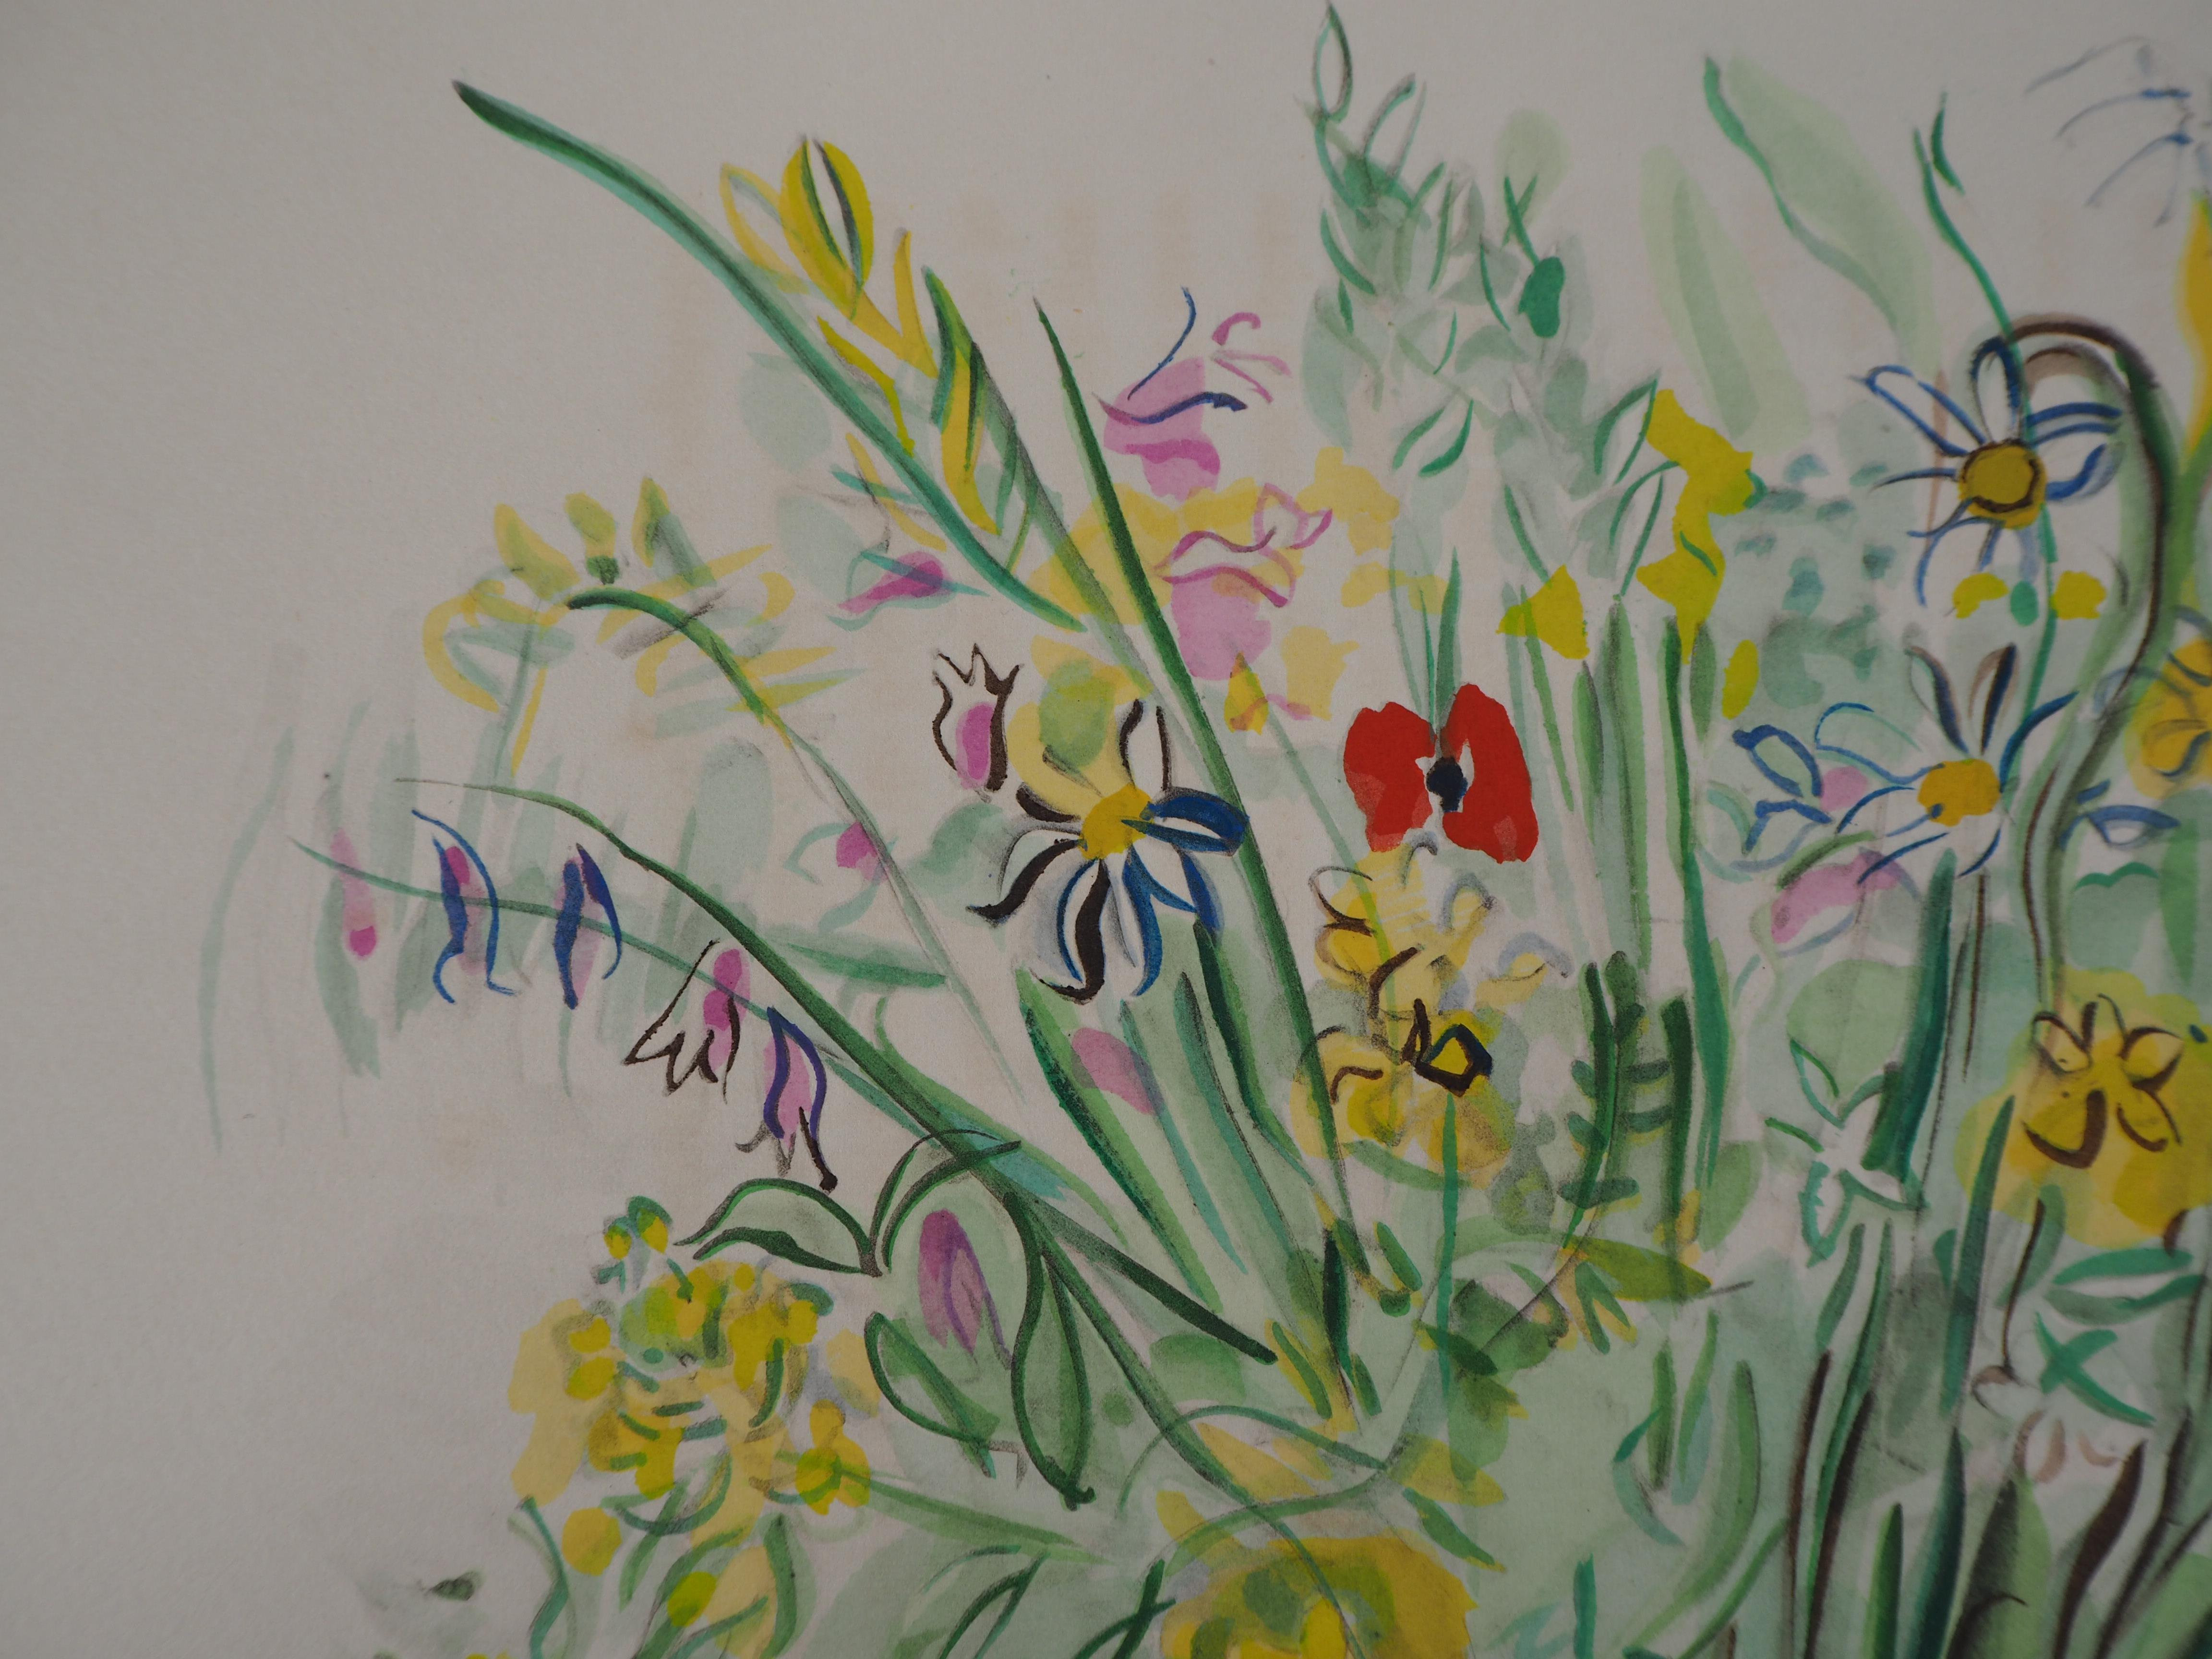 Summer Garden : a Bunch of Flowers - Original Lithograph - Gray Figurative Print by Raoul Dufy